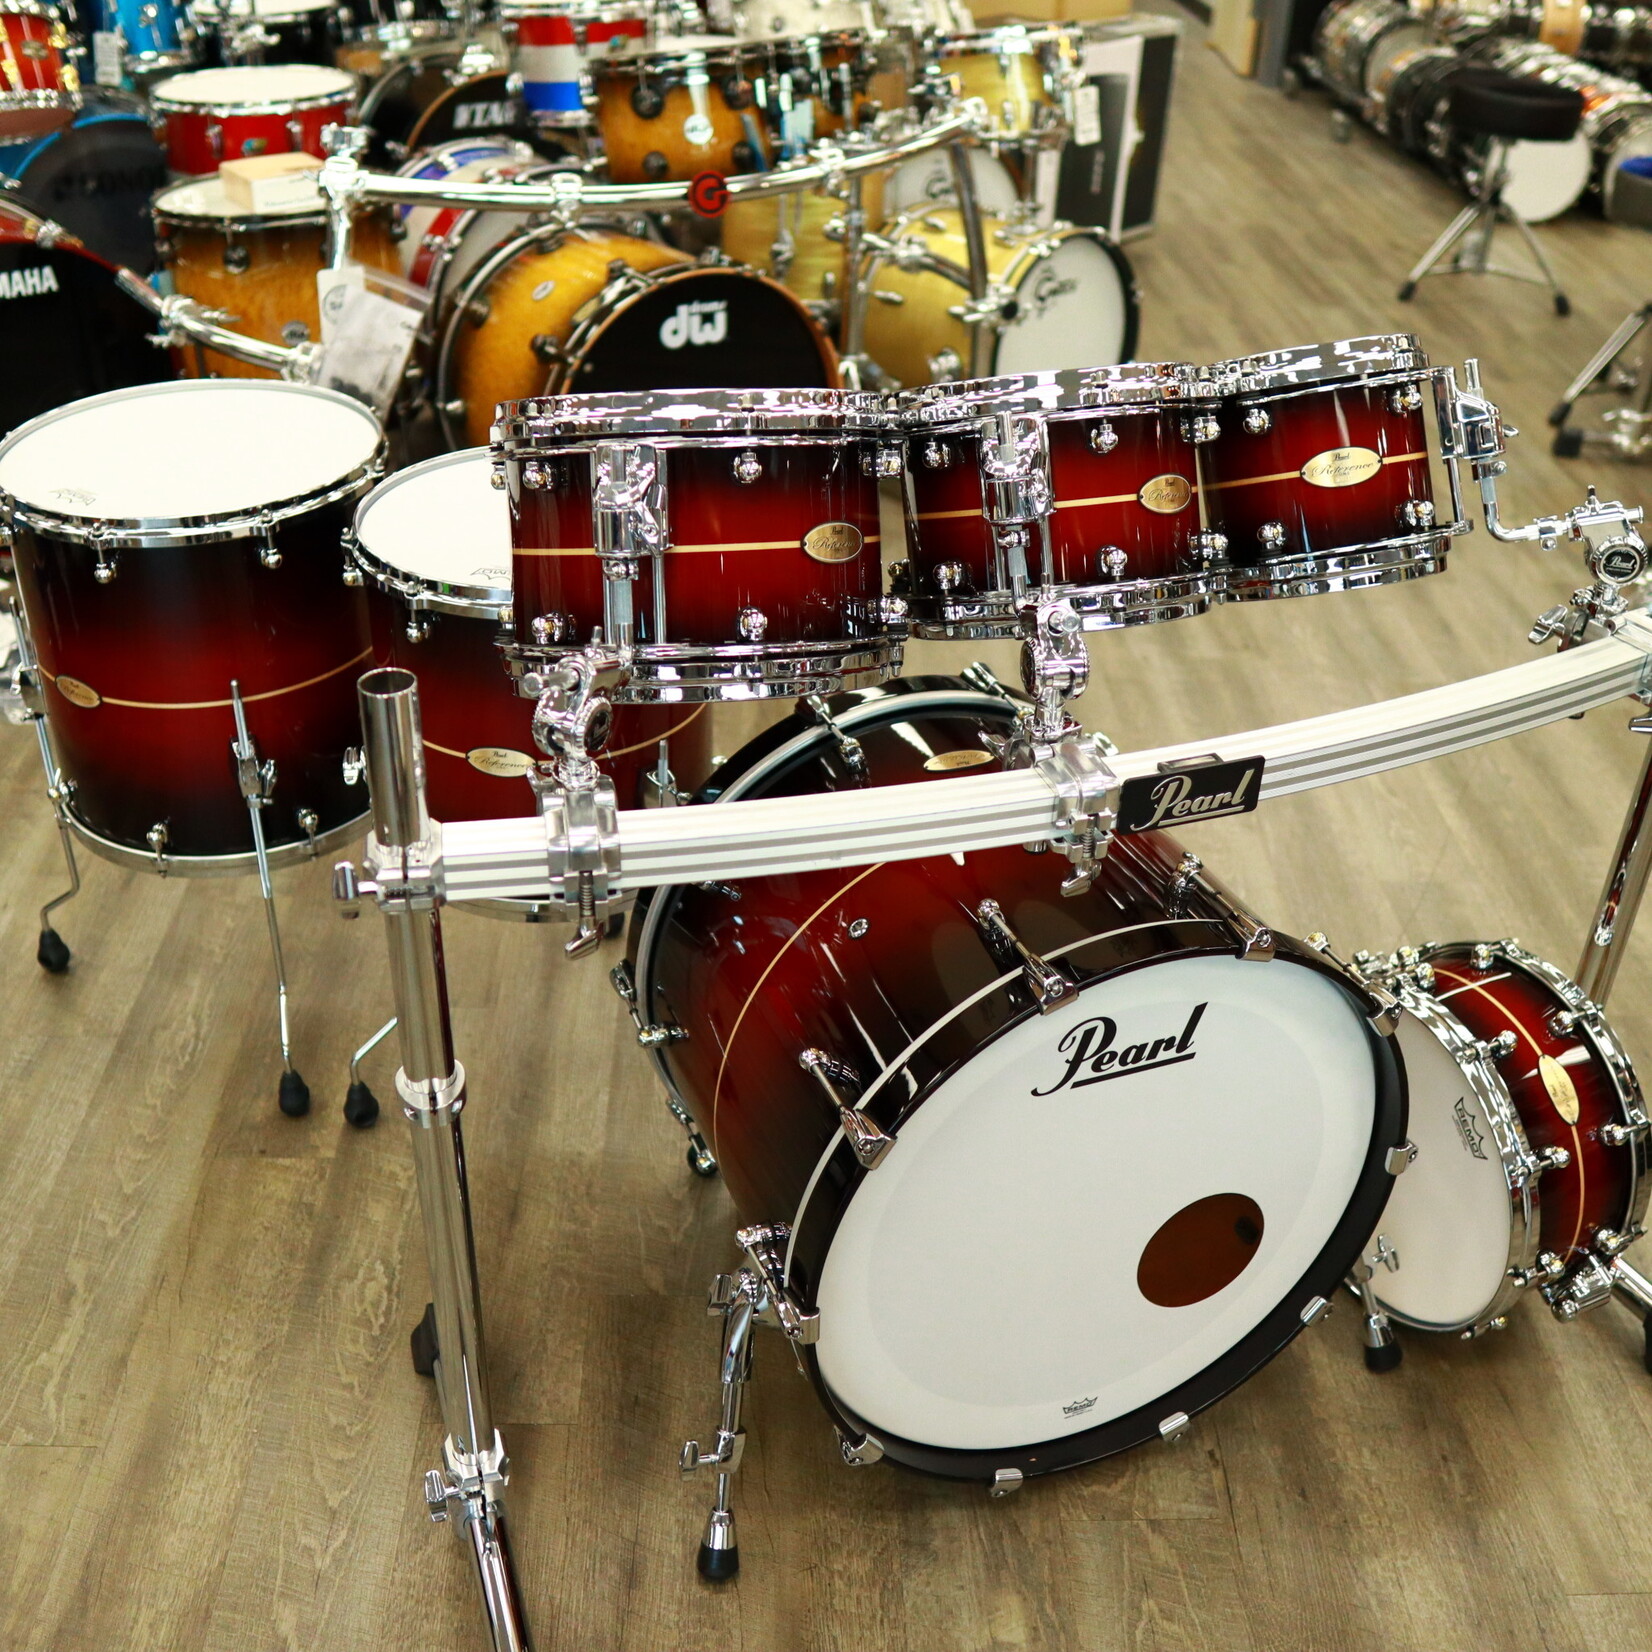 Pearl Reference One 4-Piece Shell Pack